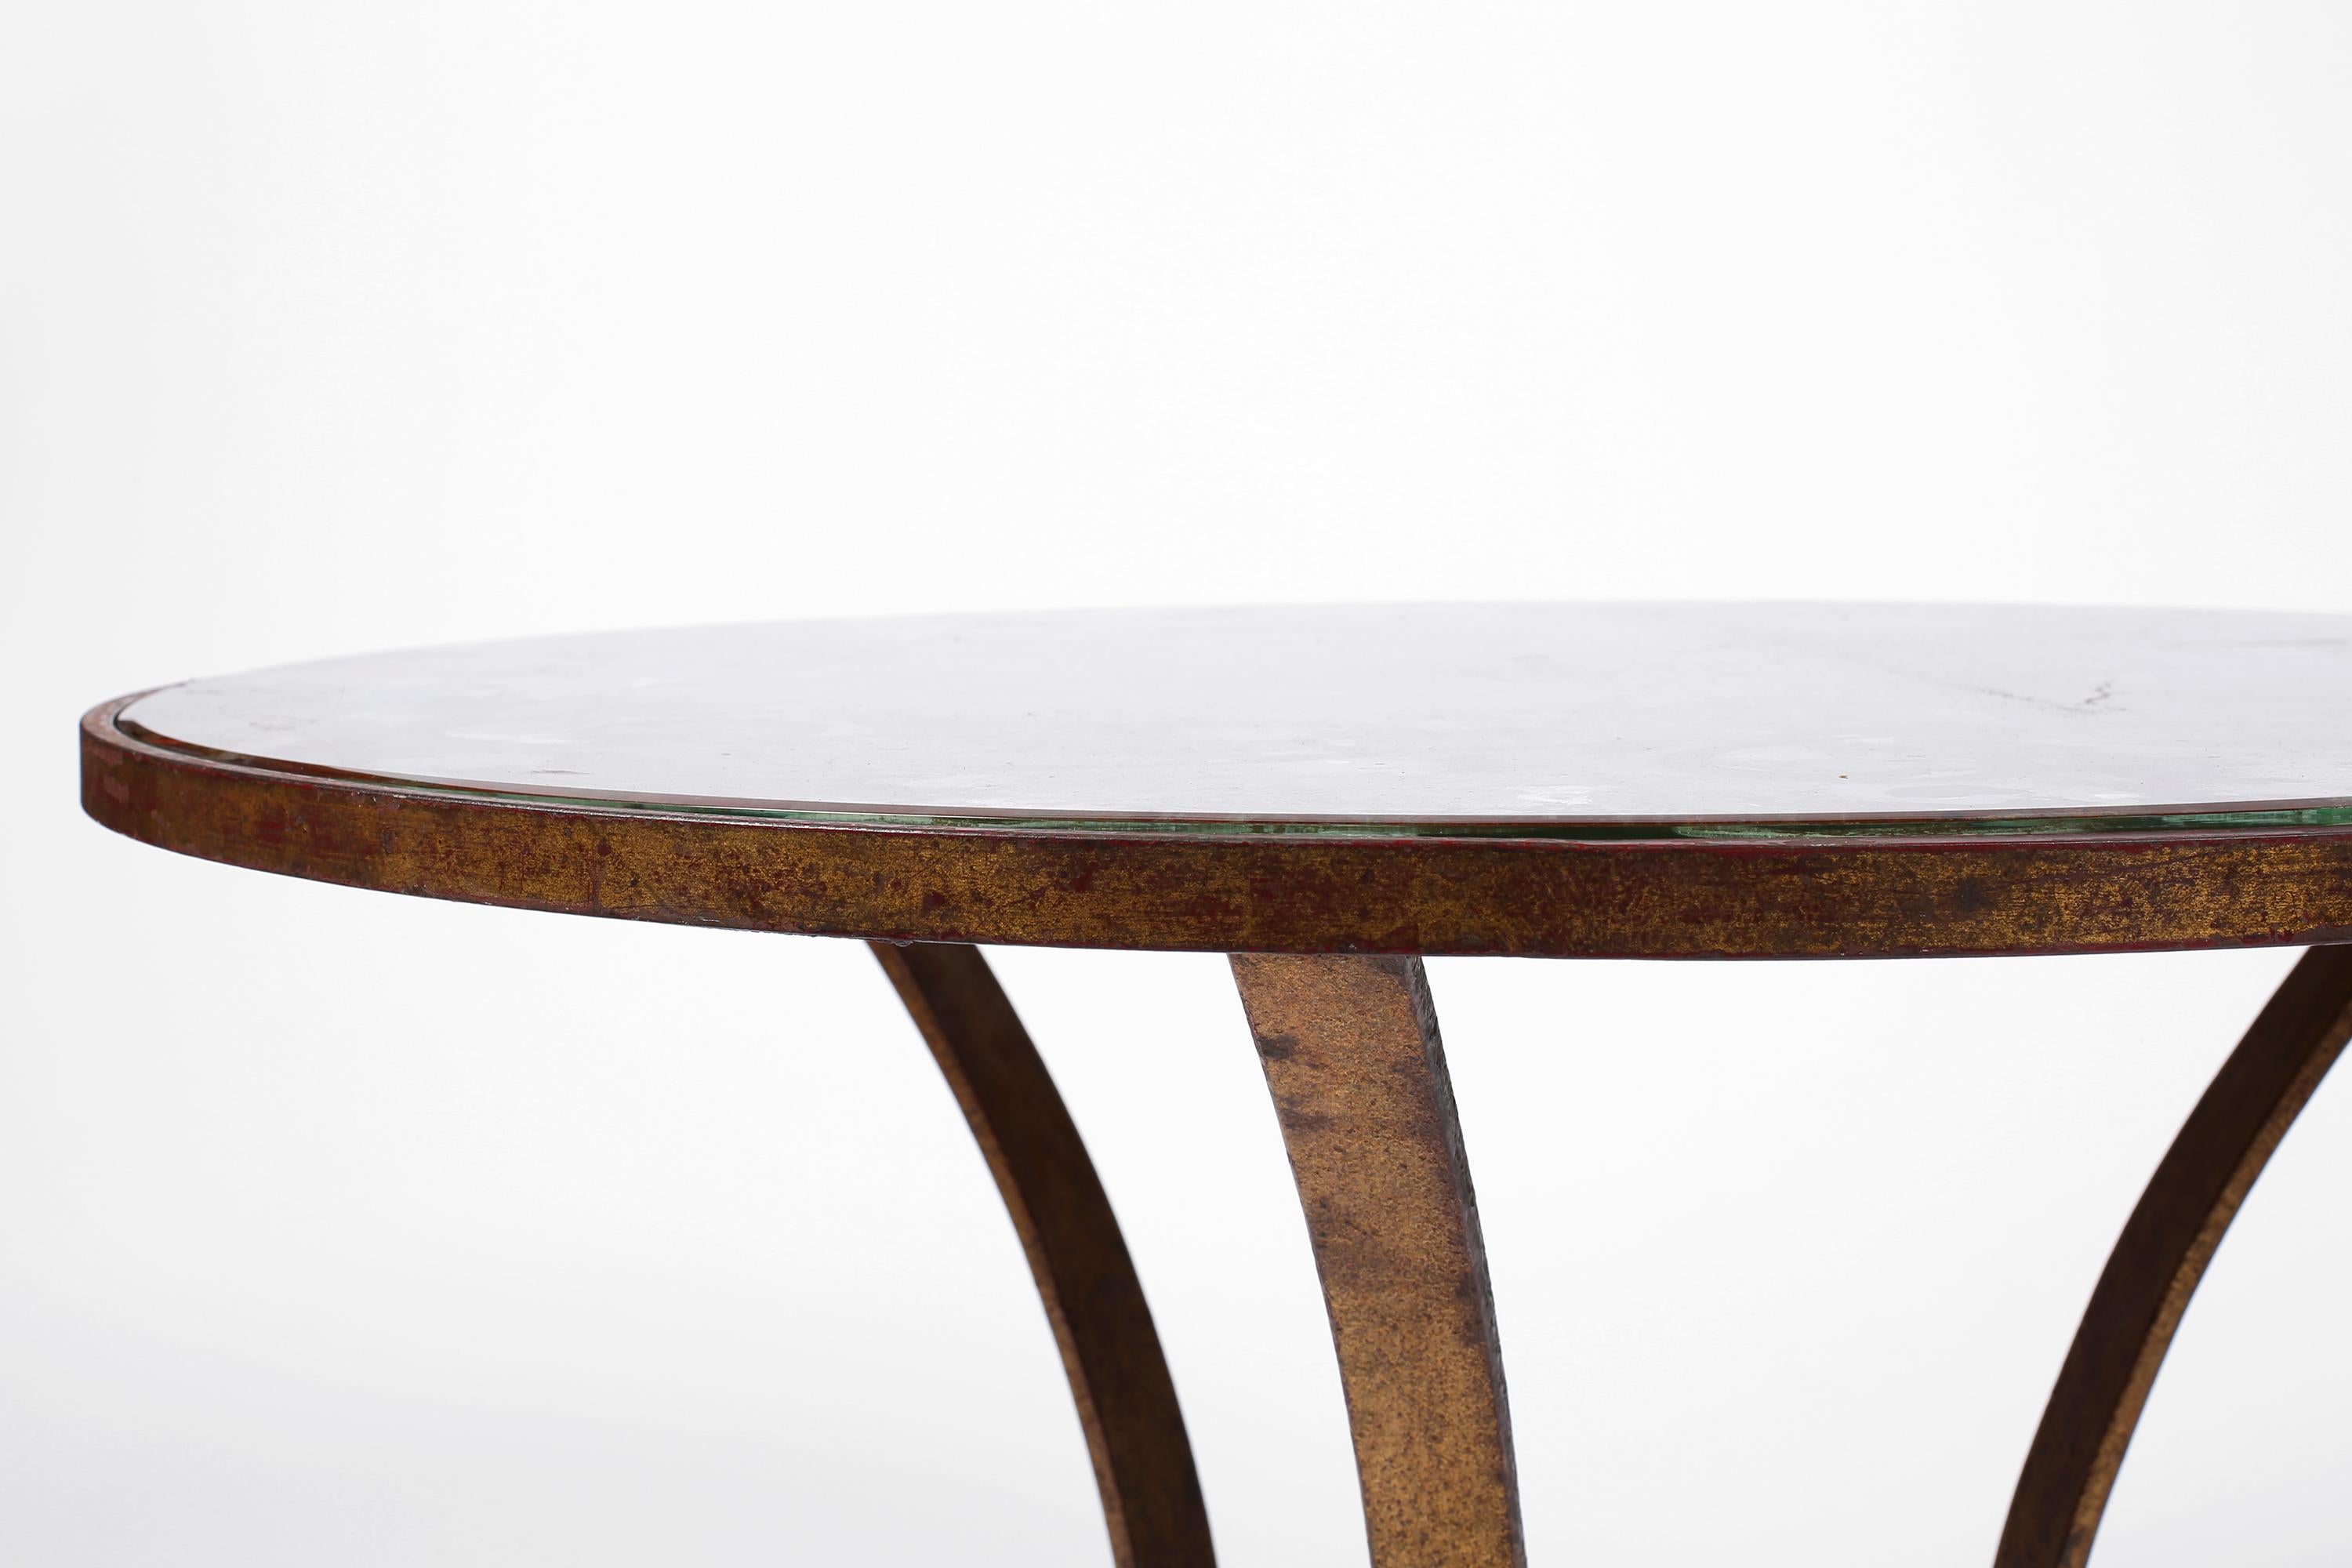 1940s French Gilt Forged Iron and Églomisé Glass Coffee Table by René Drouet For Sale 3